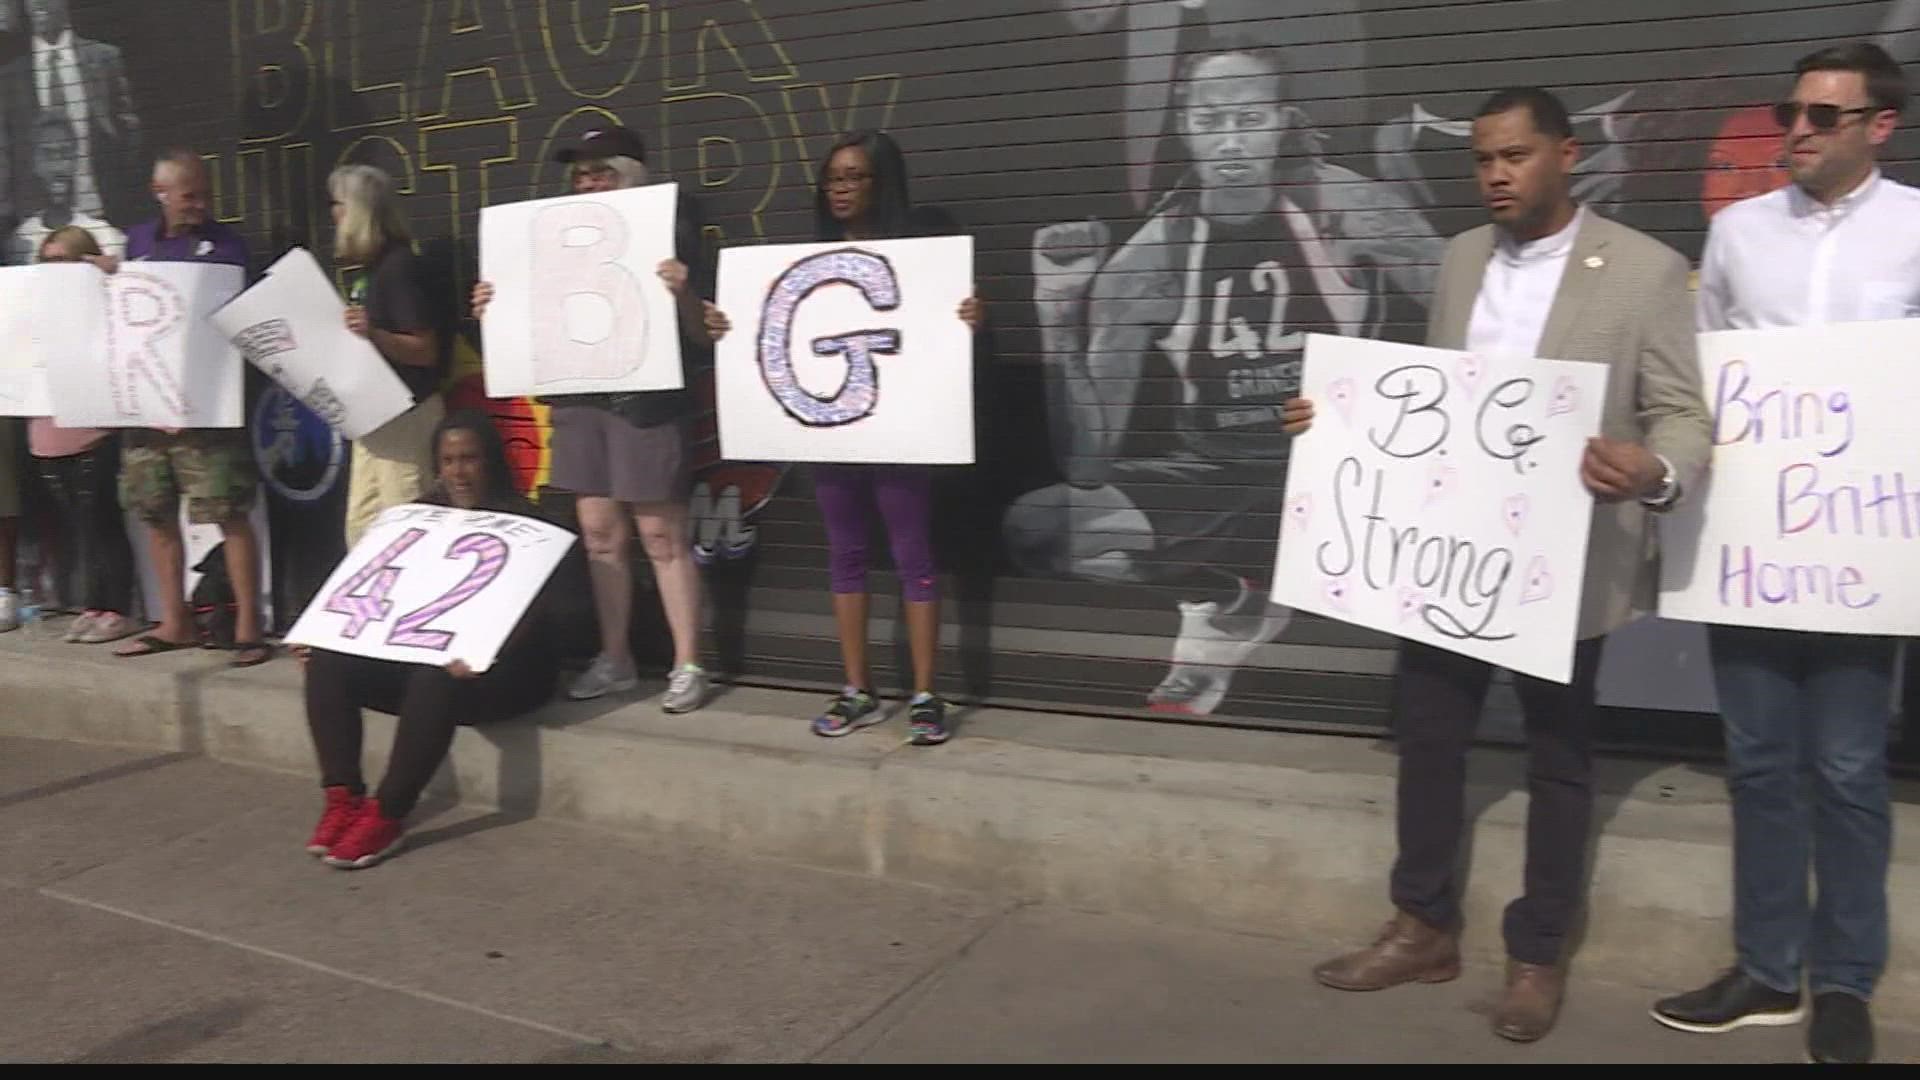 The Shining Light Foundation held a rally for Brittney Griner outside of the Footprint Center on Tuesday. Griner was arrested in Russia four months ago.